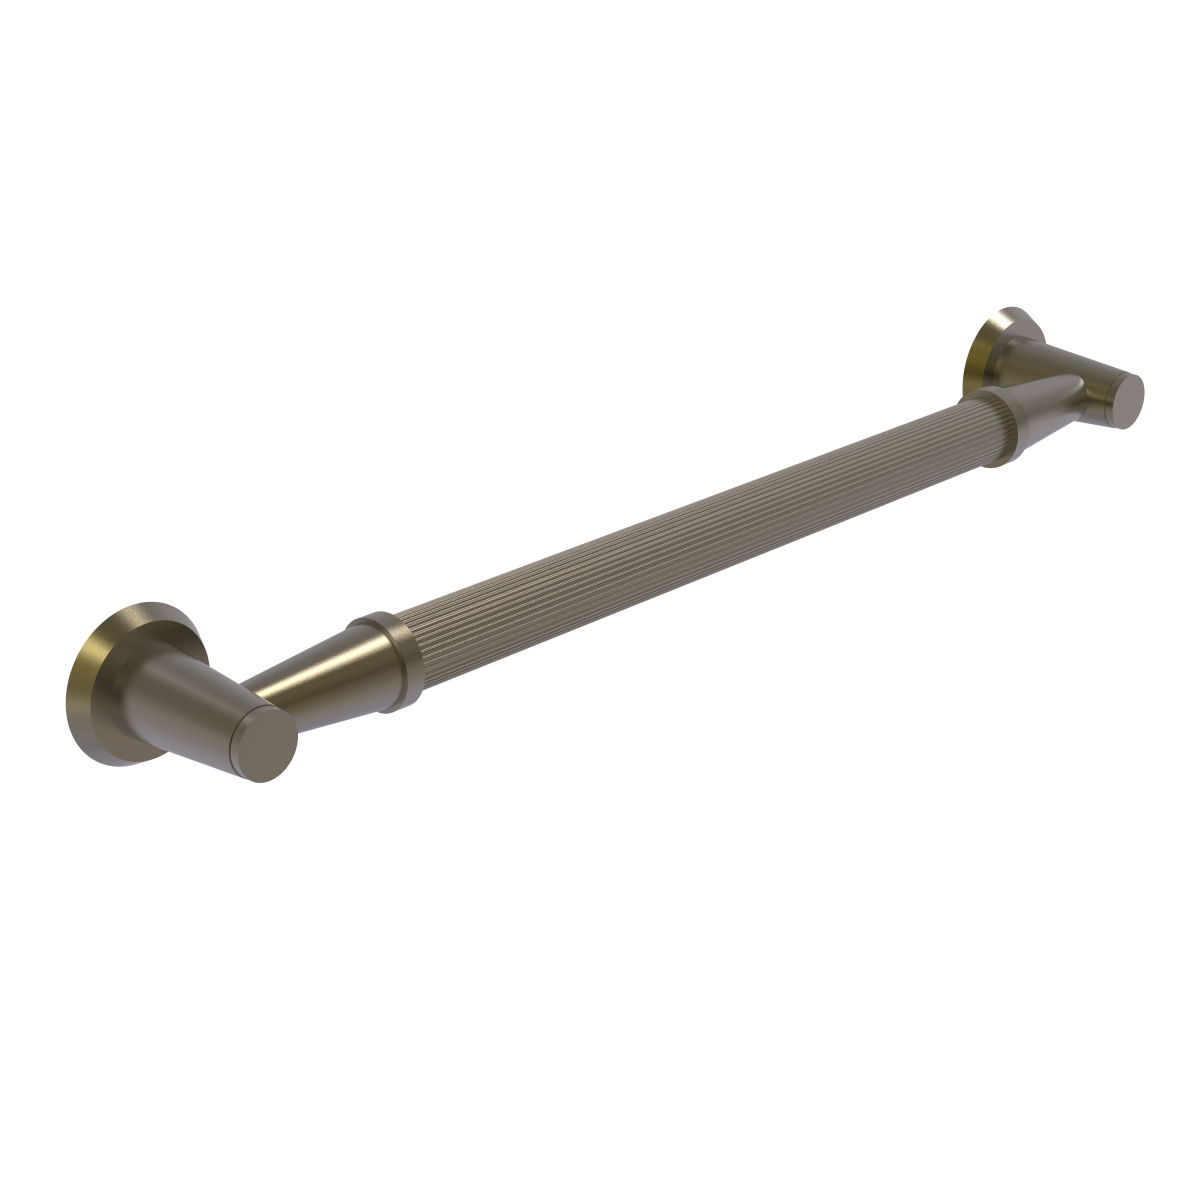 Picture of Allied Brass MD-GRR-36-ABR 36 in. Reeded Grab Bar, Antique Brass - 3.5 x 38 x 36 in.